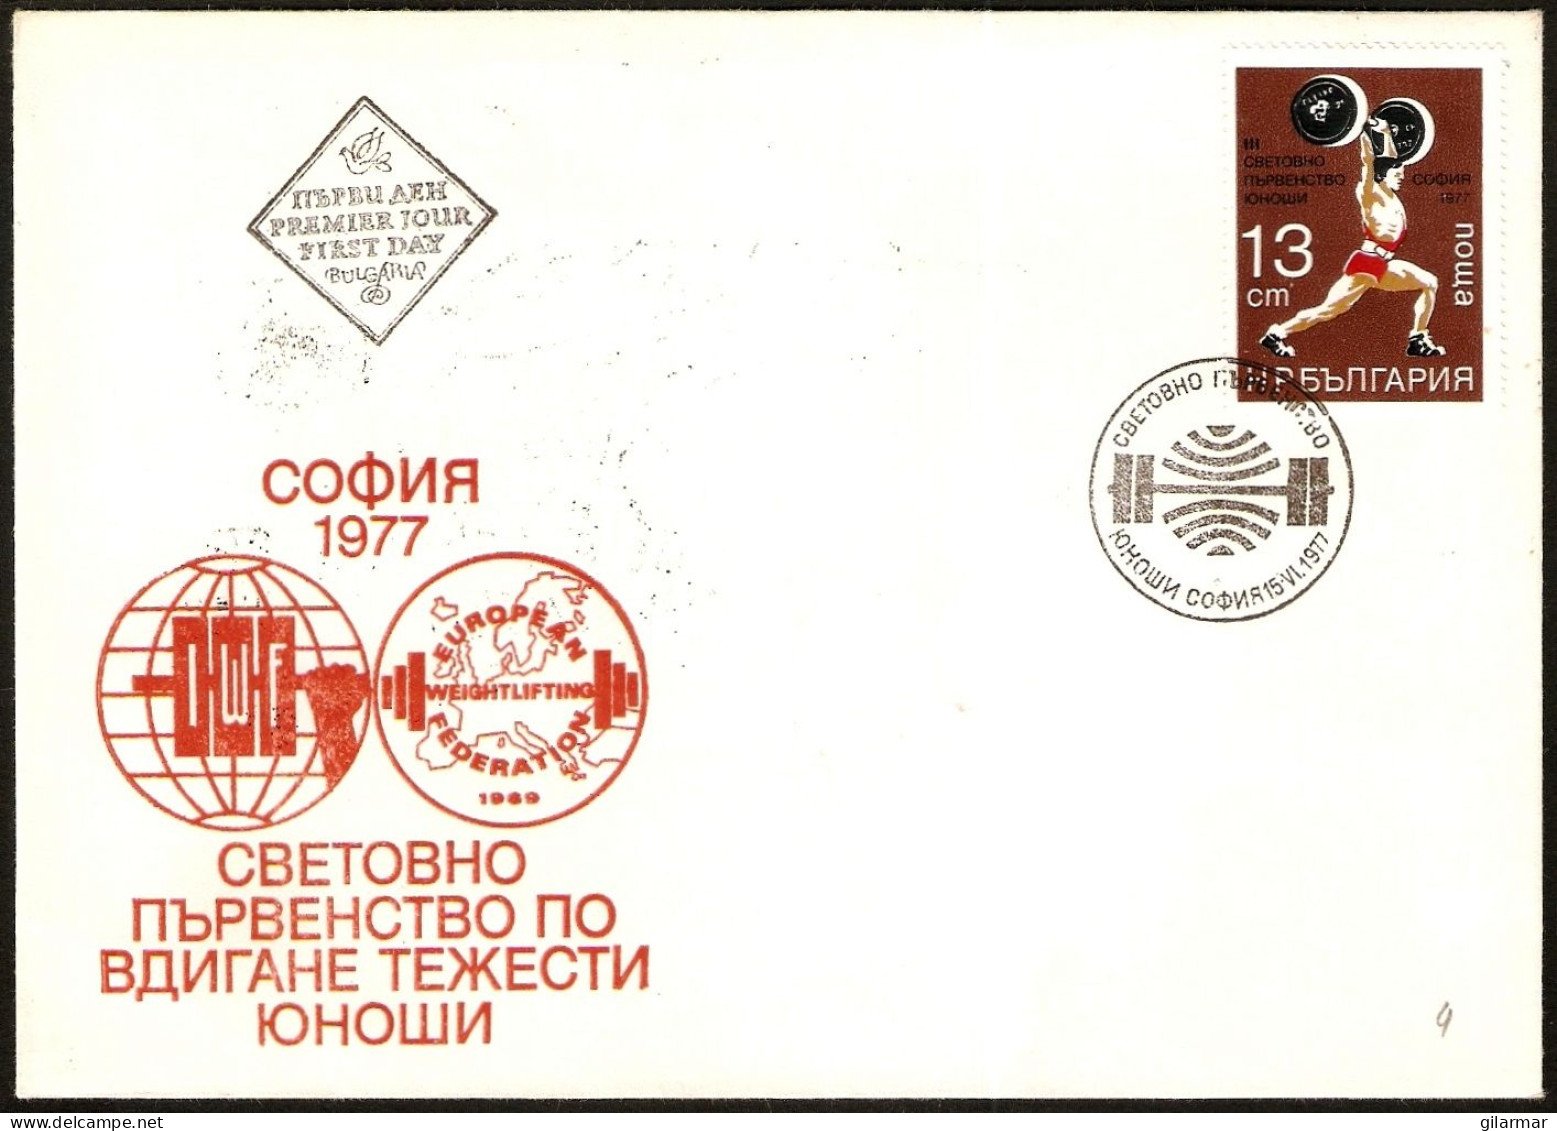 BULGARIA SOFIA 1977 - WEIGHT-LIFTING WORLD JUNIOR CHAMPIONSHIPS - FDC - M - Weightlifting